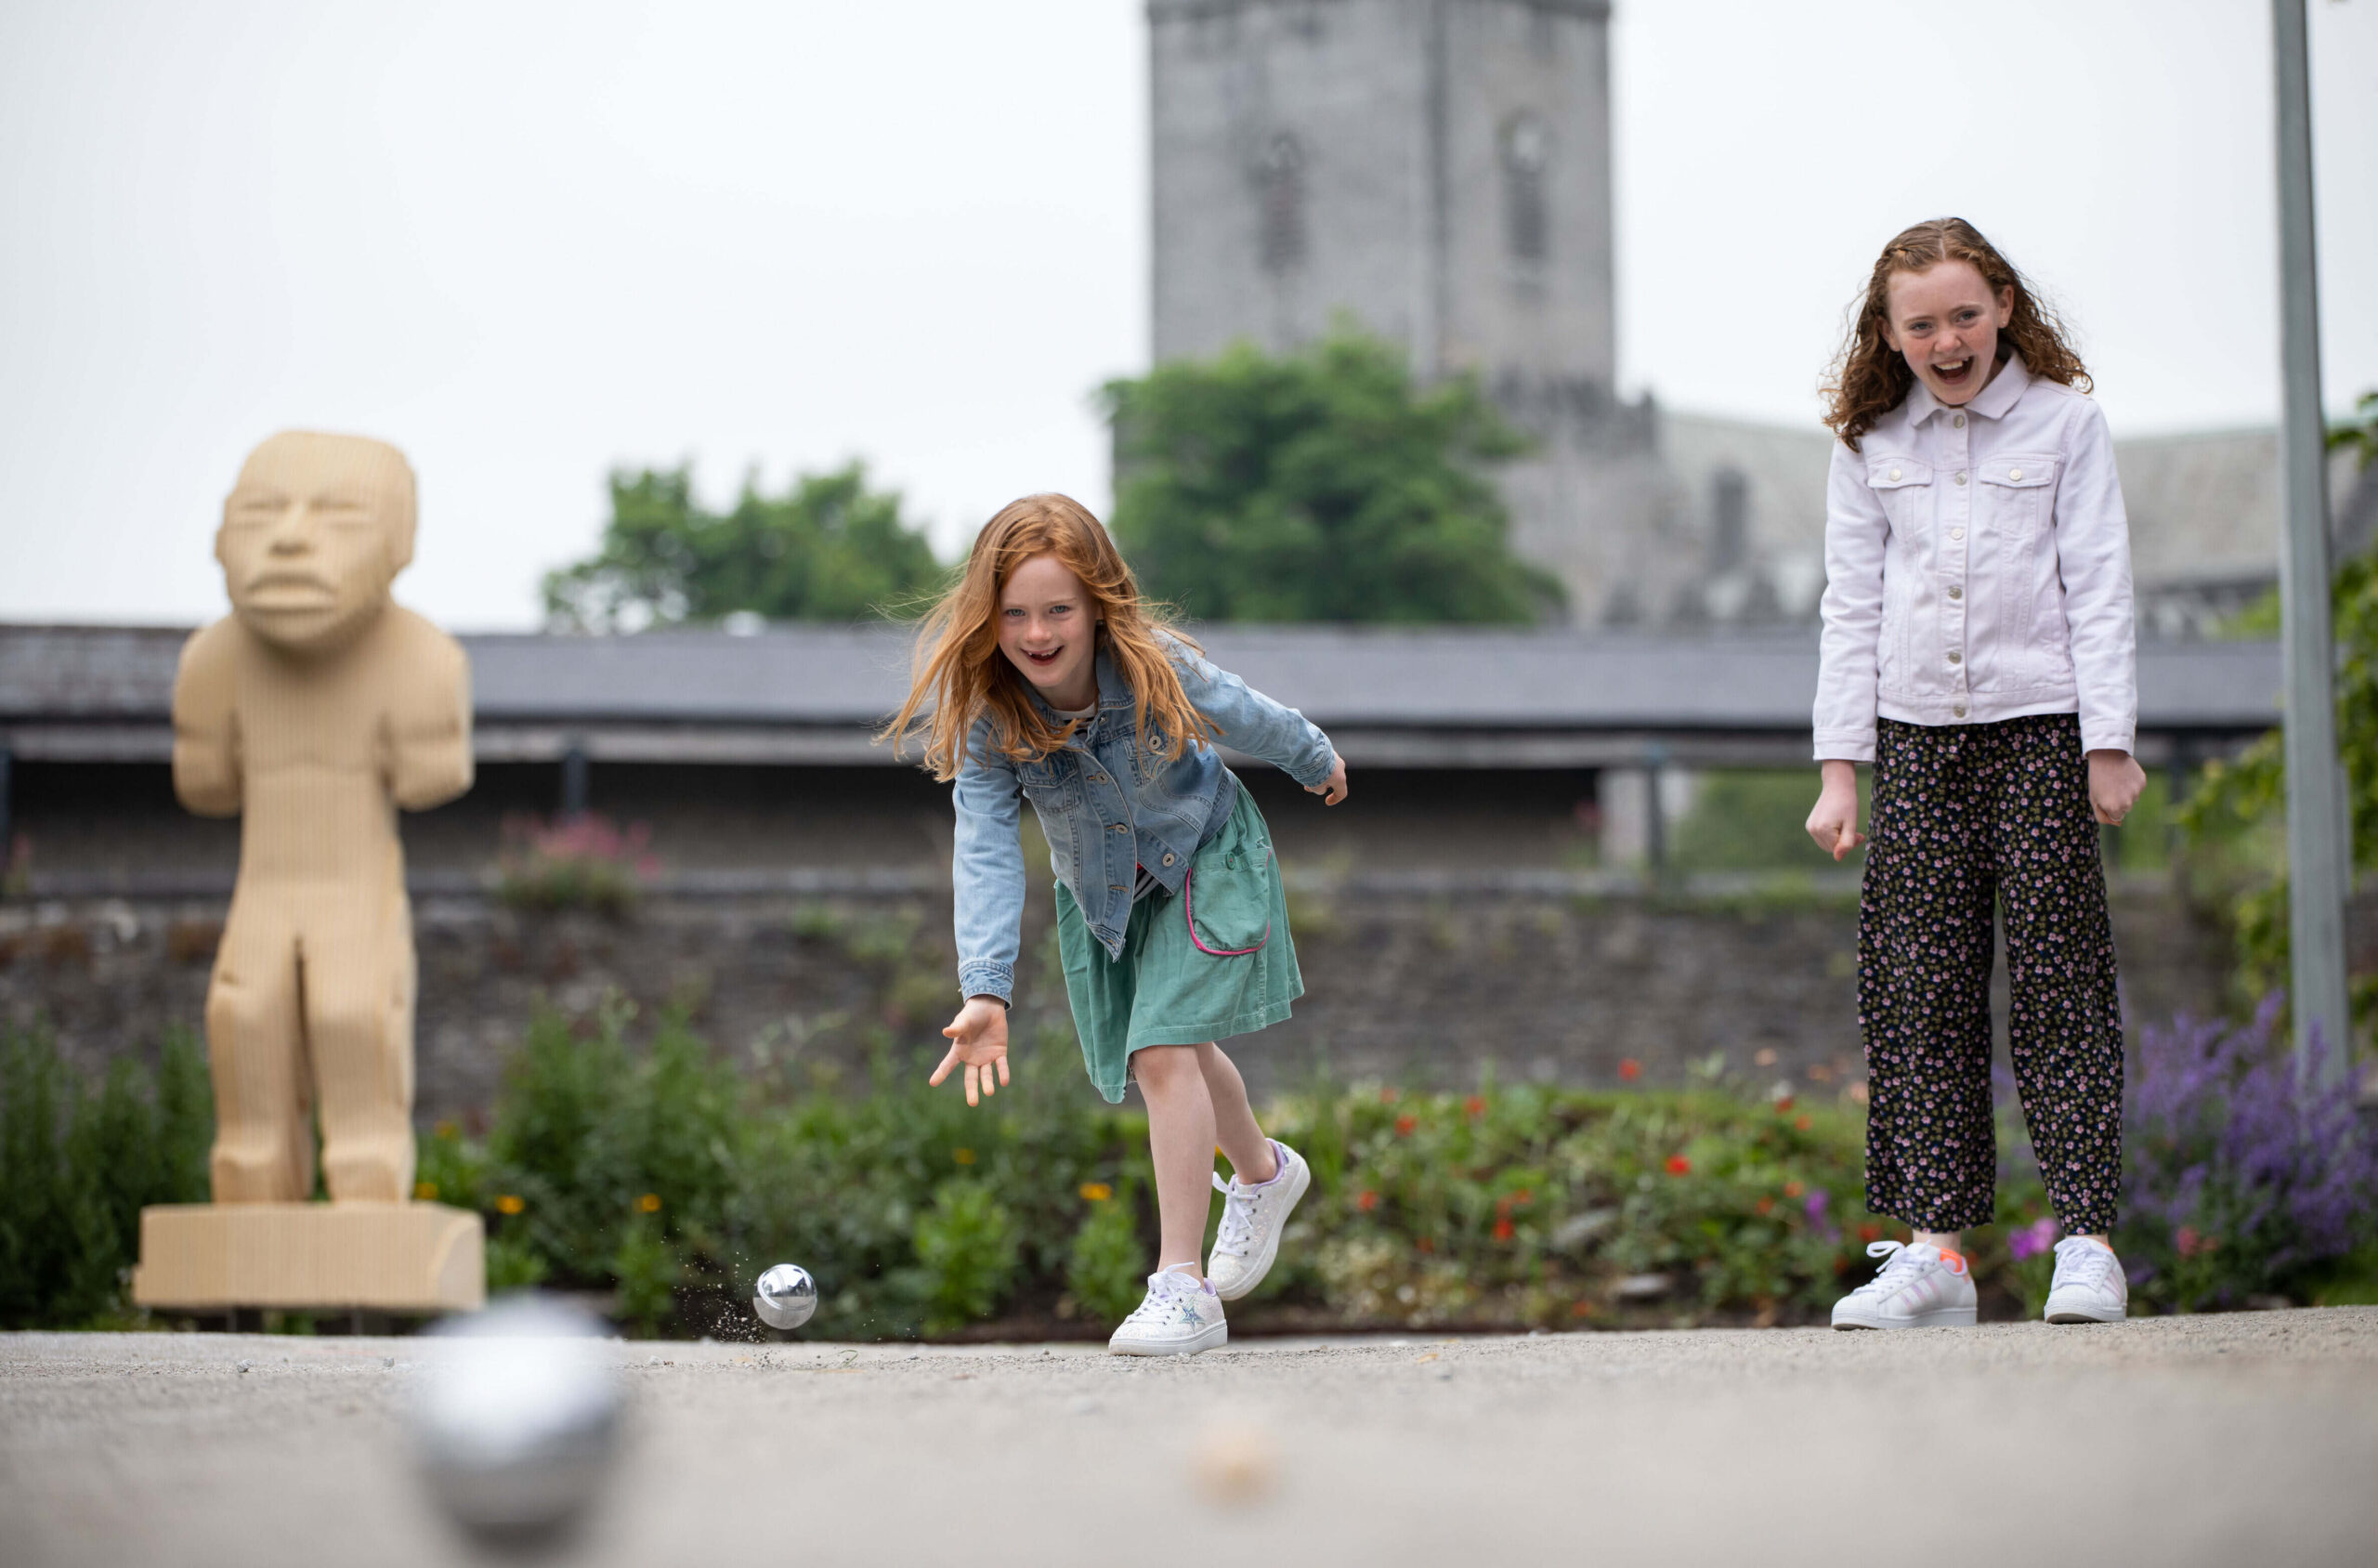 Limerick Bastille Day Boules - On Saturday, July 10 at the Hunt Museum, a traditional French game of ‘pétanque’ will take place with many prizes!